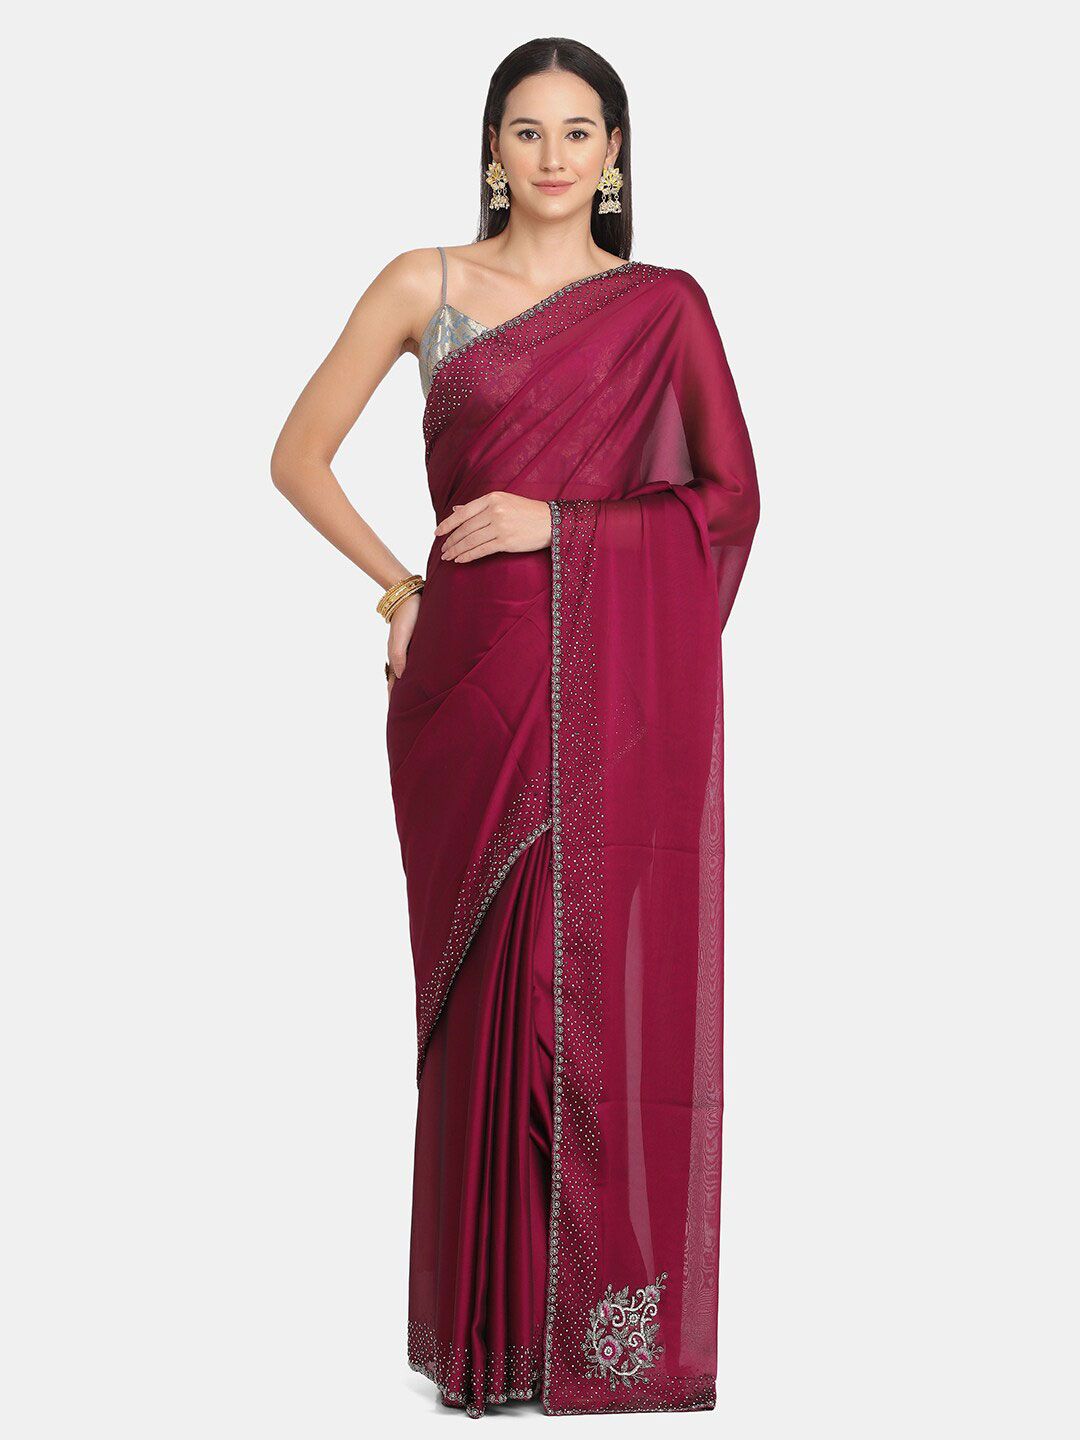 BOMBAY SELECTIONS Purple & Black Beads and Stones Art Silk Saree Price in India